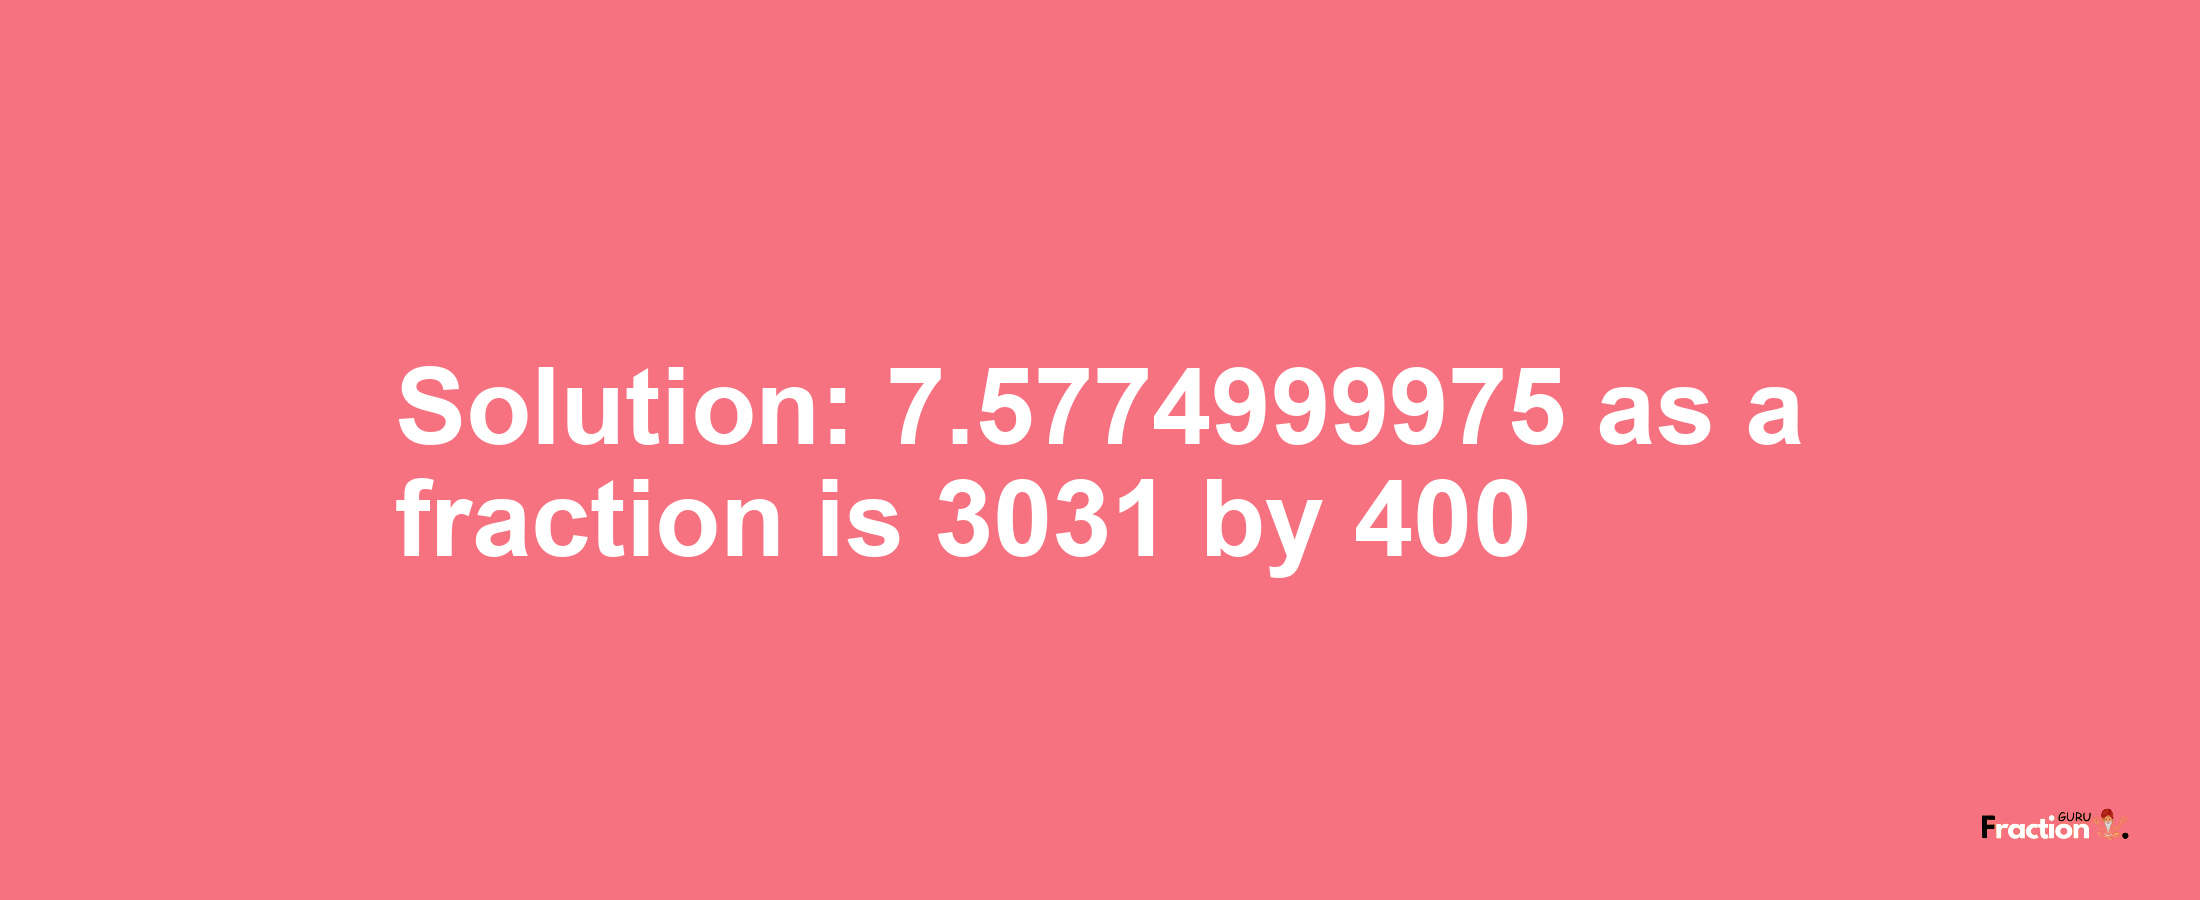 Solution:7.5774999975 as a fraction is 3031/400